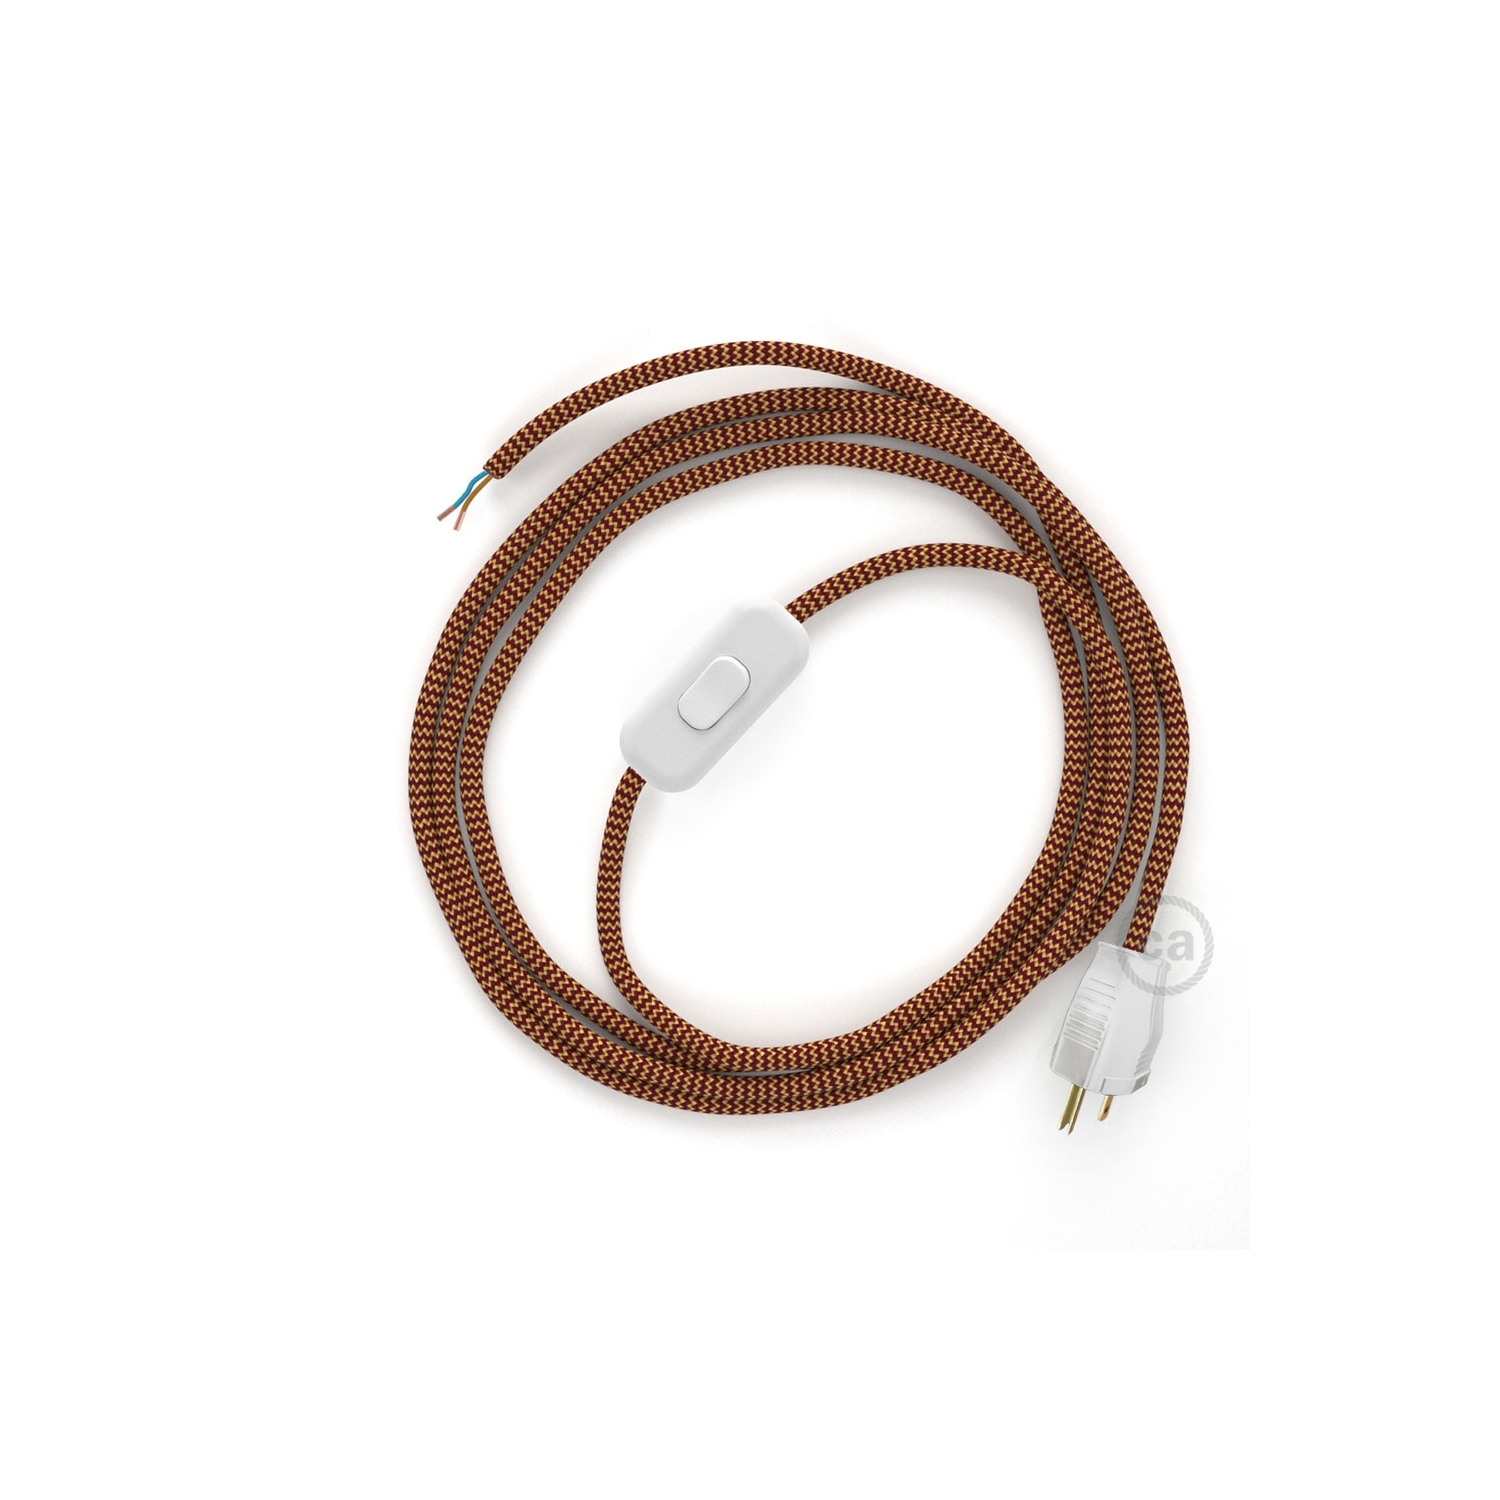 Power Cord with in-line switch, RZ23 Gold & Burgundy Rayon Chevron - Choose color of switch/plug